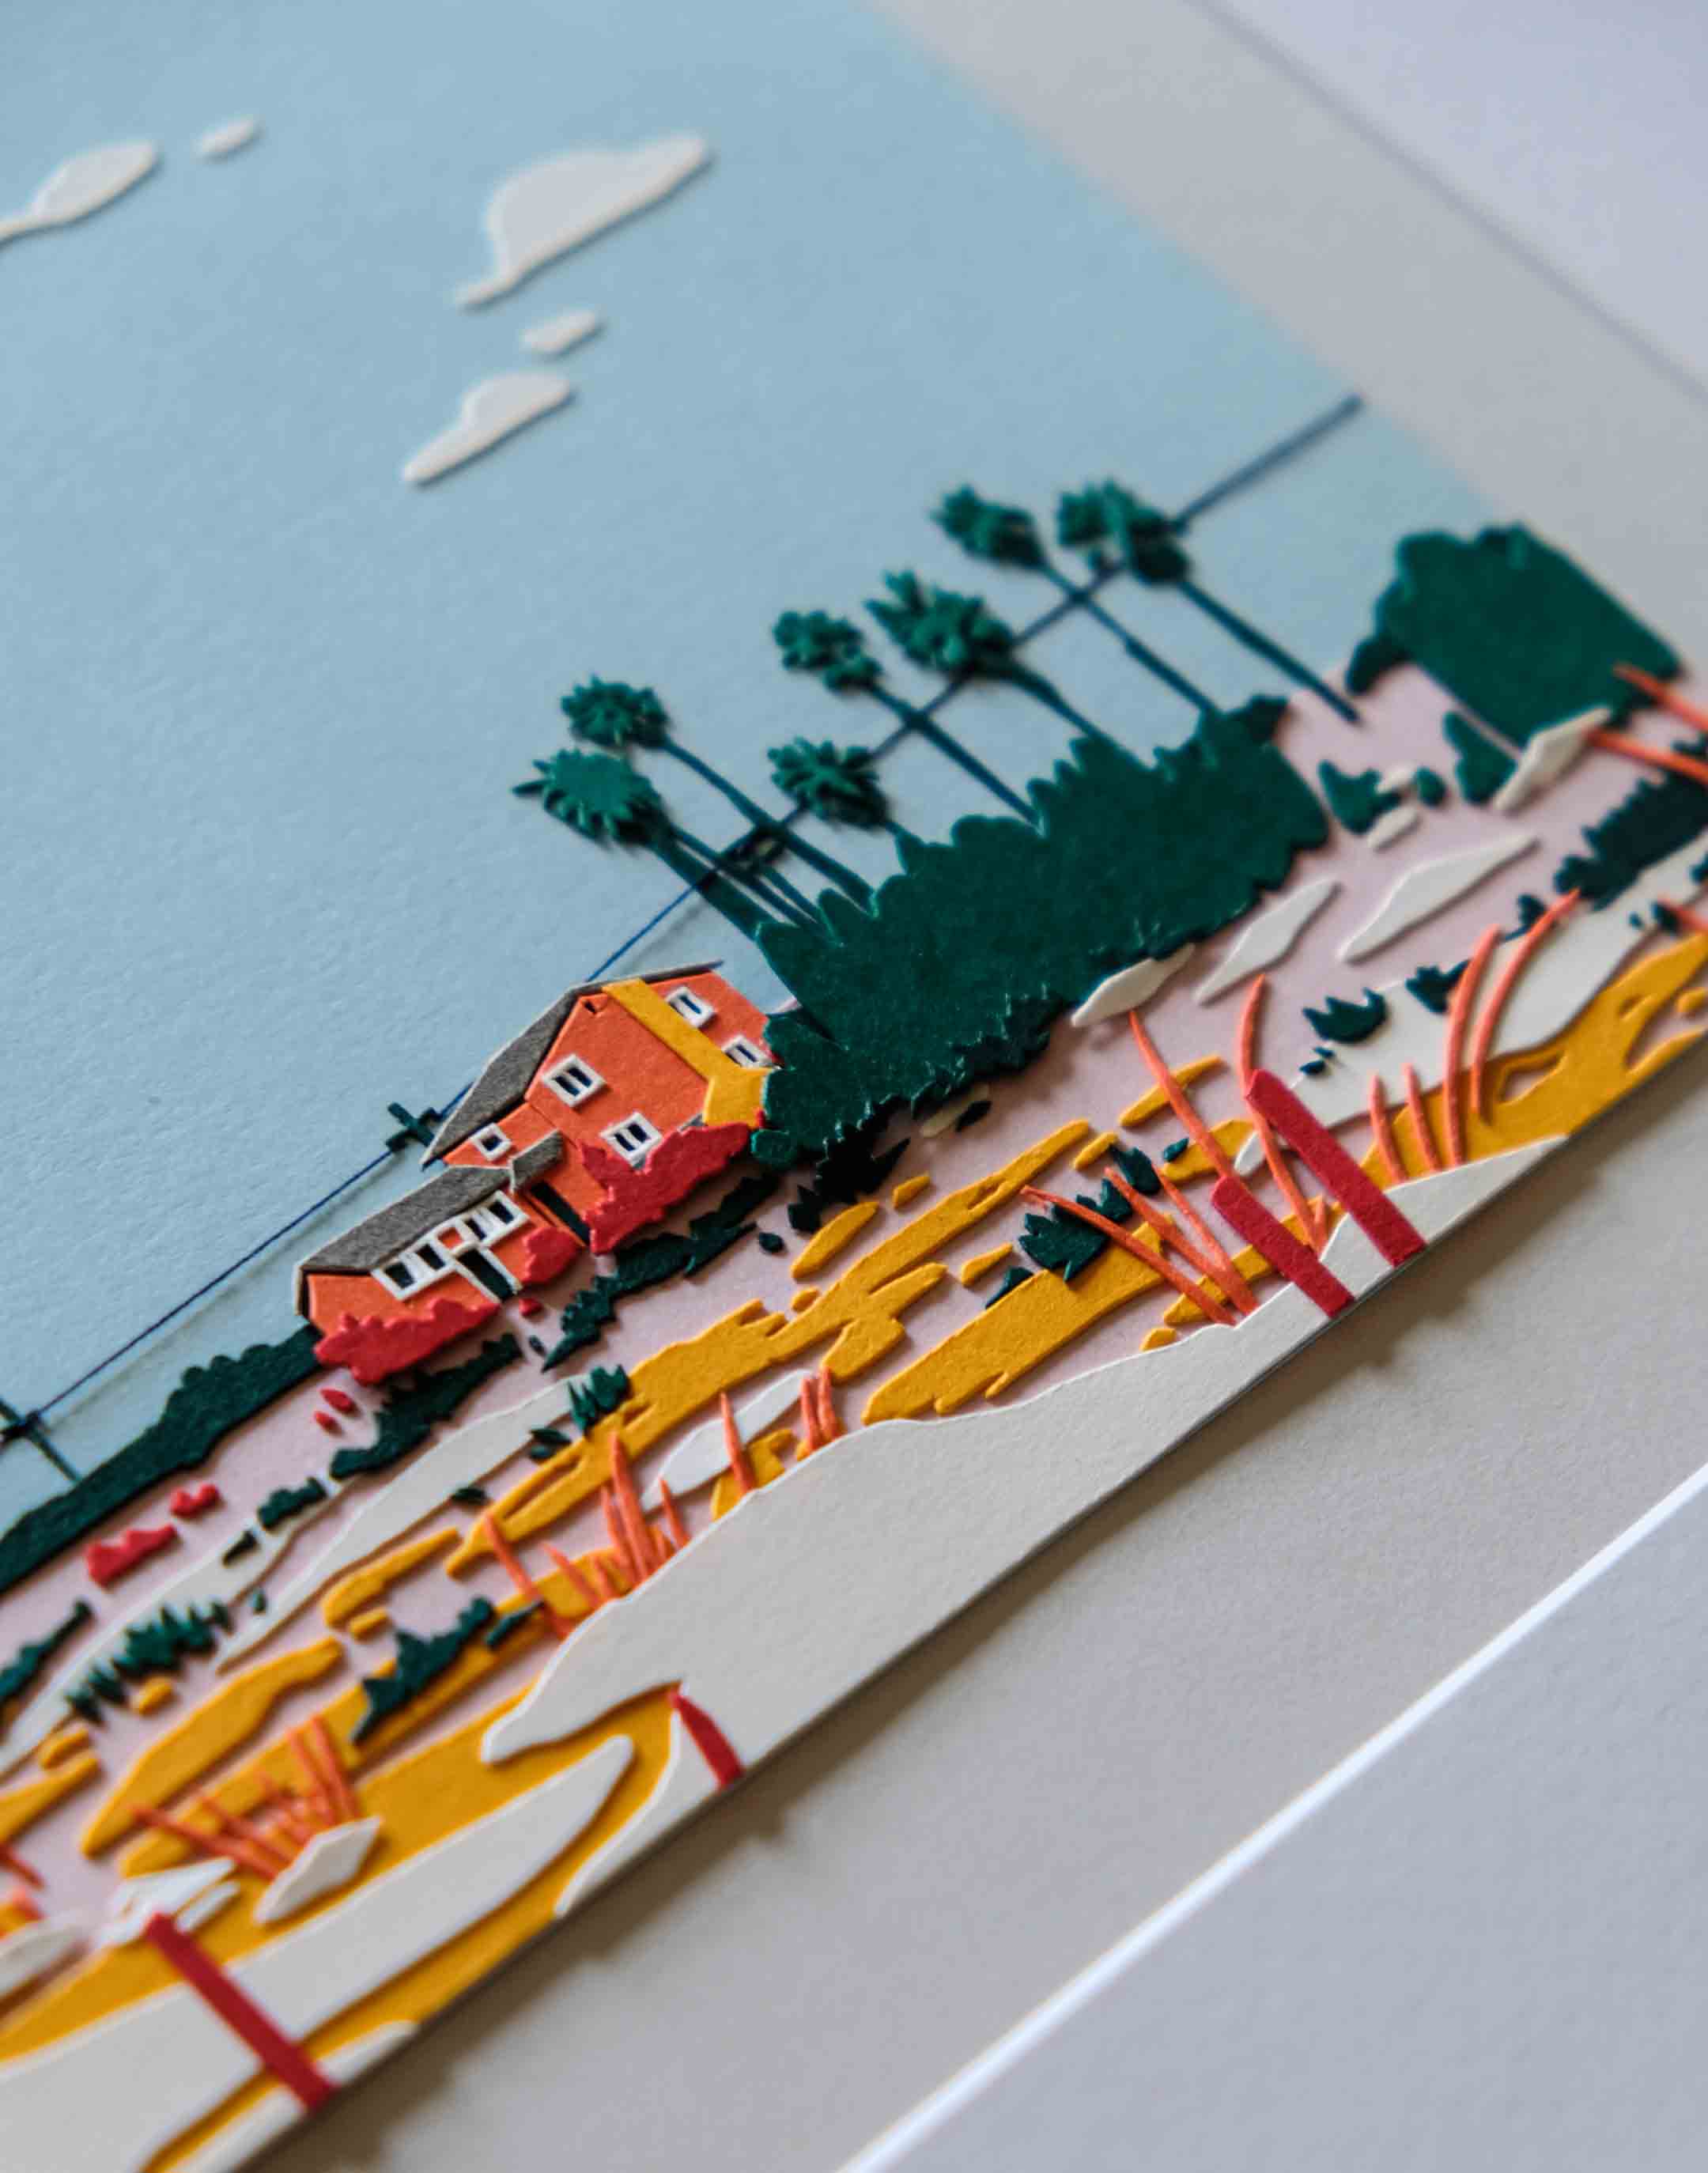 An angled close-up shows the layers of paper that form the bright orange two-story house, warm-colored fields, dark green palm trees, and white clouds.